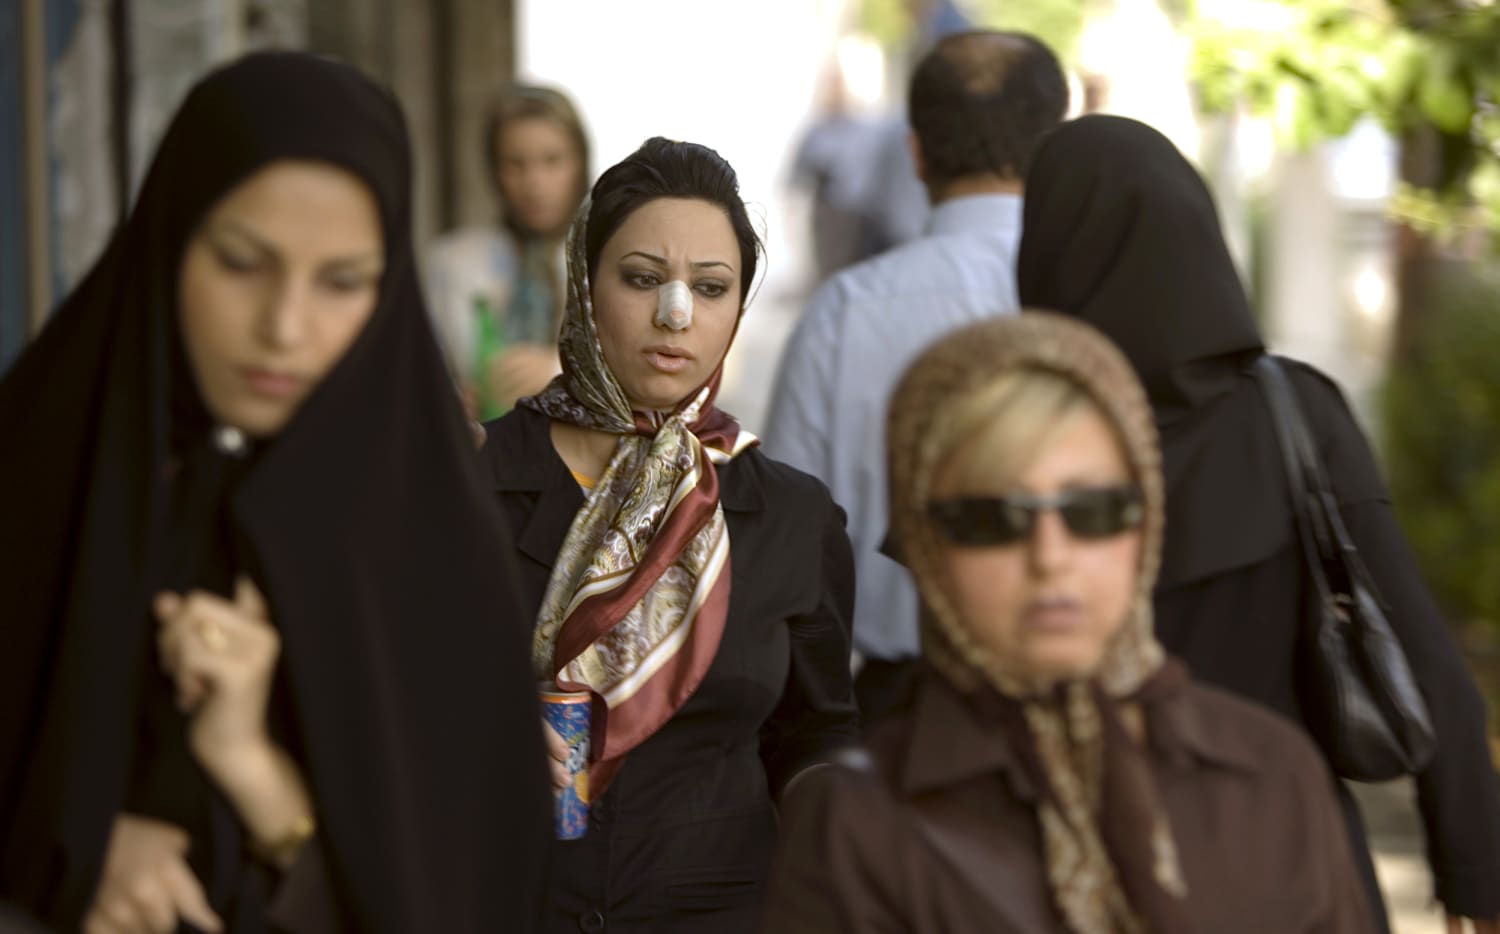 Nose Jobs, Tummy Tucks and Breast Enhancements Take Off in Iran